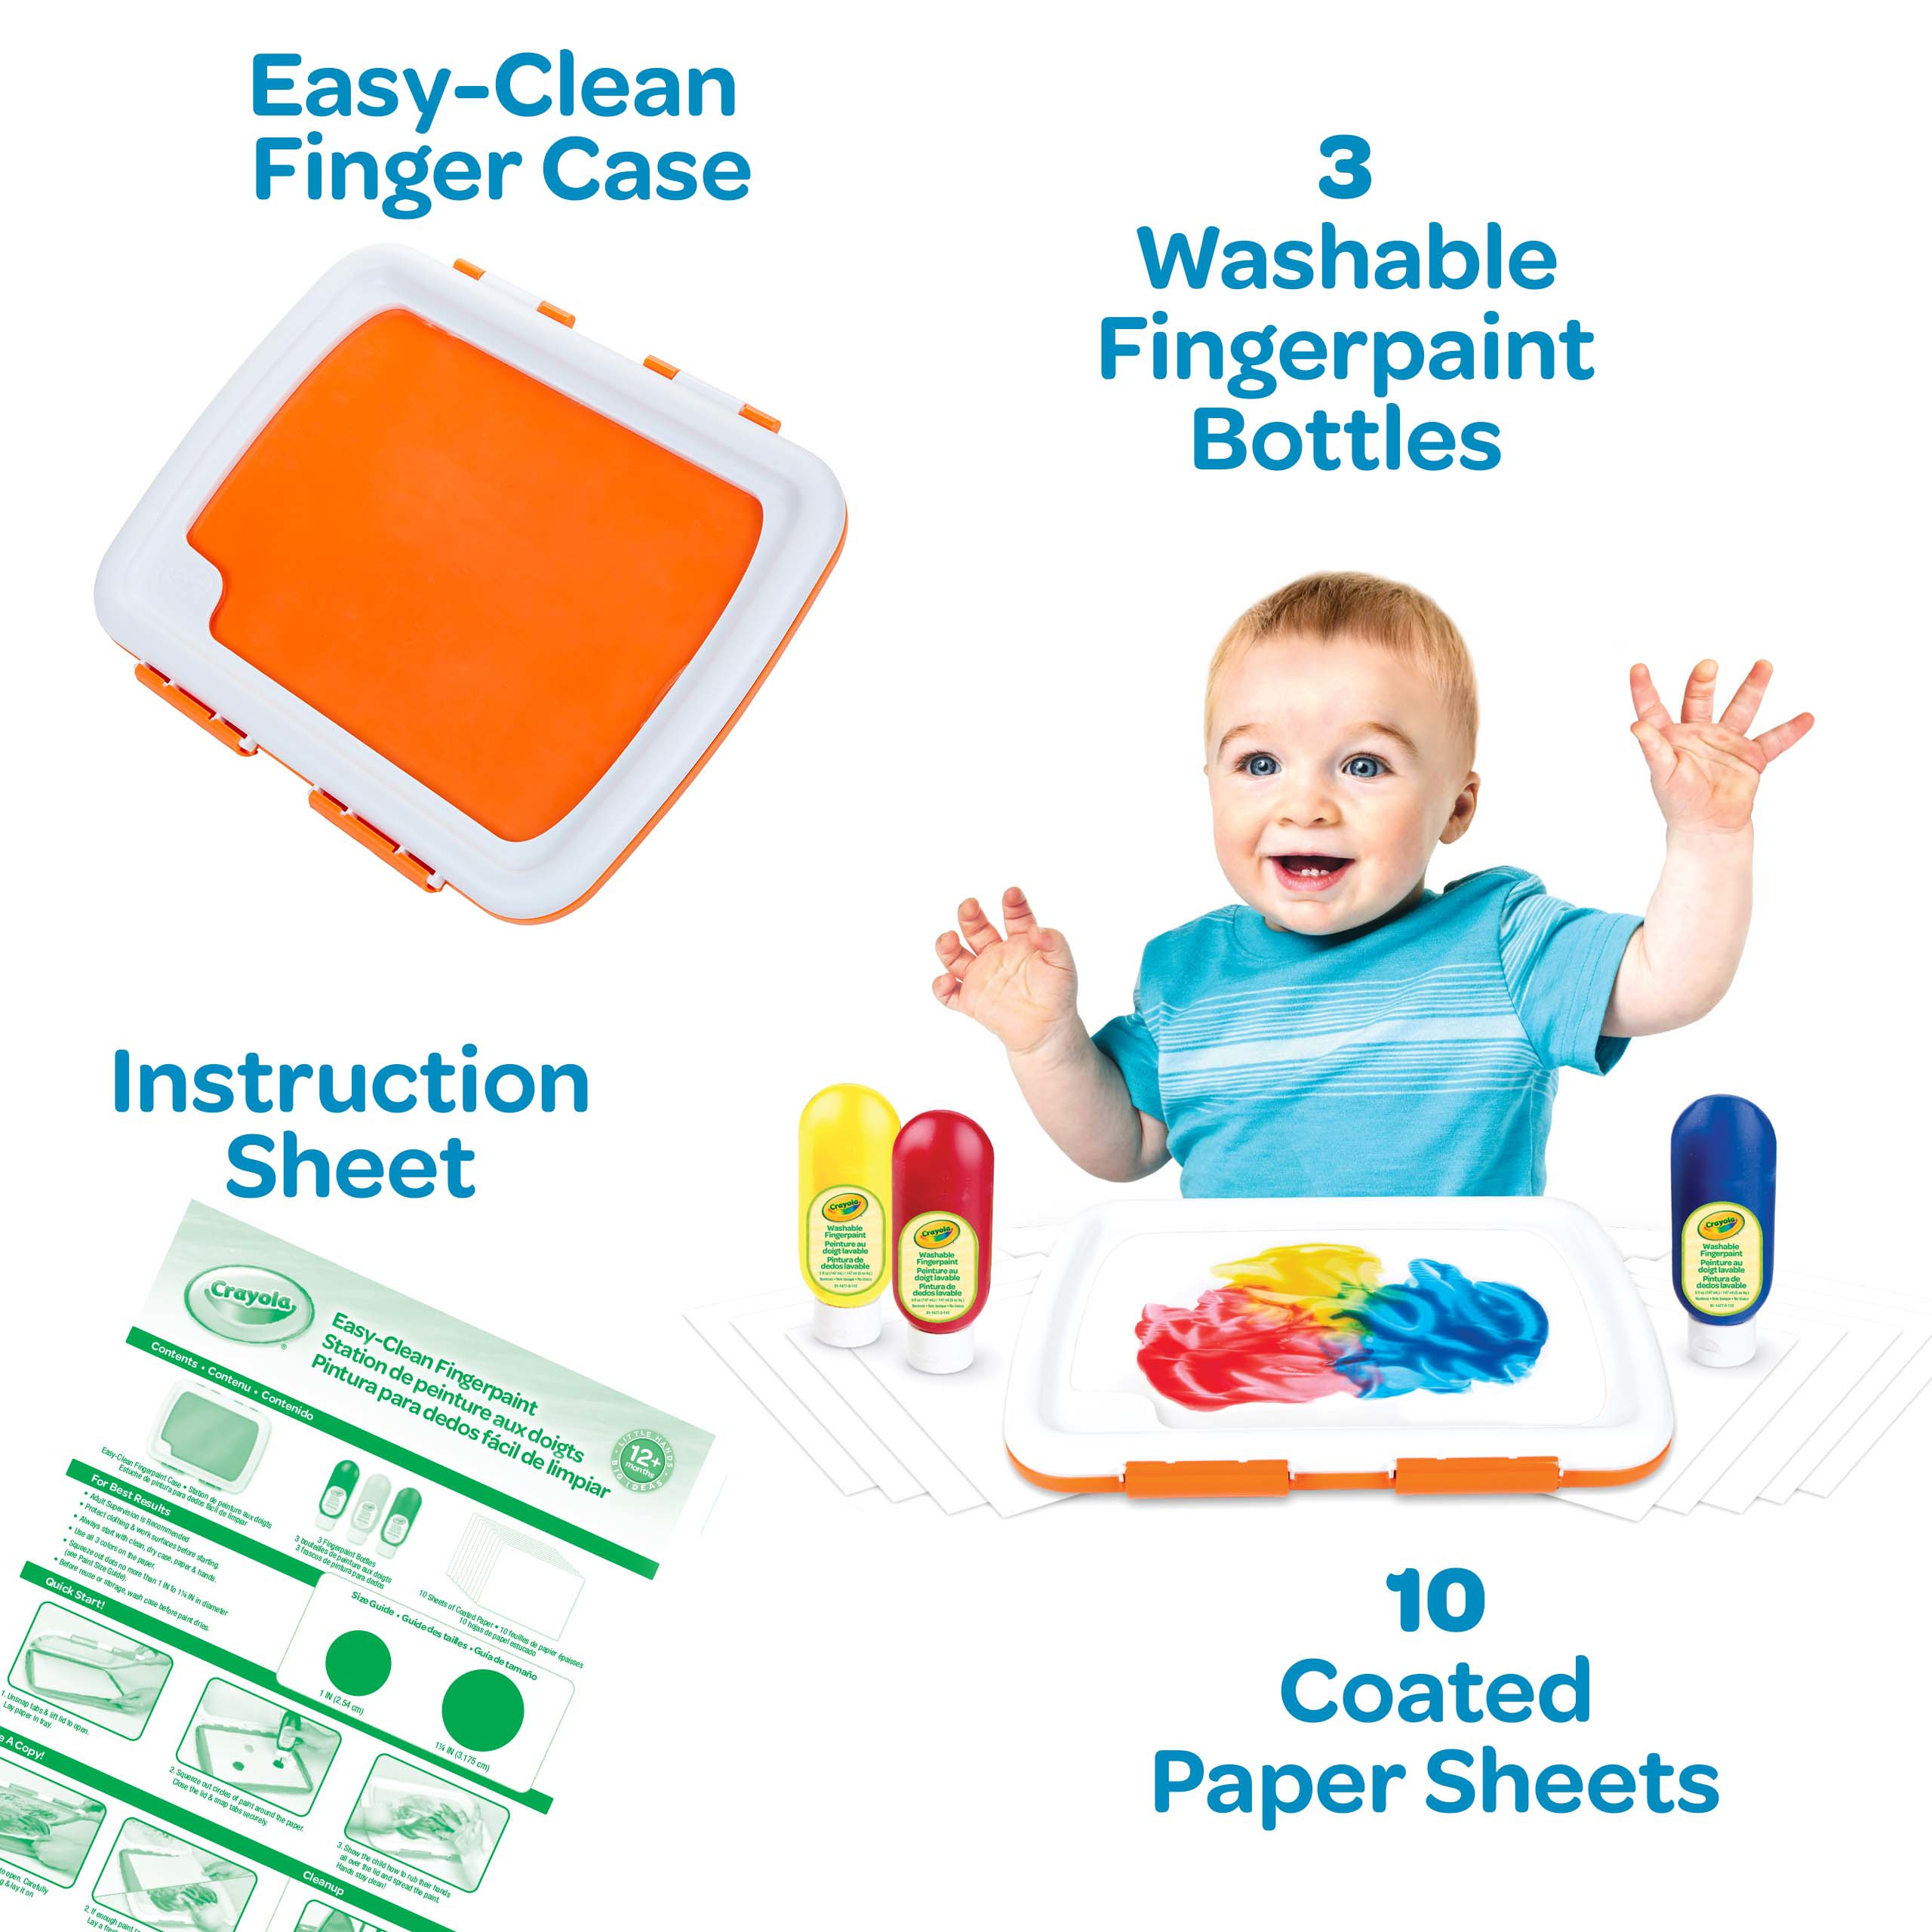 Crayola Washable Finger Paint Station, Less Mess Finger Paints for Toddlers, Gift - image 3 of 9